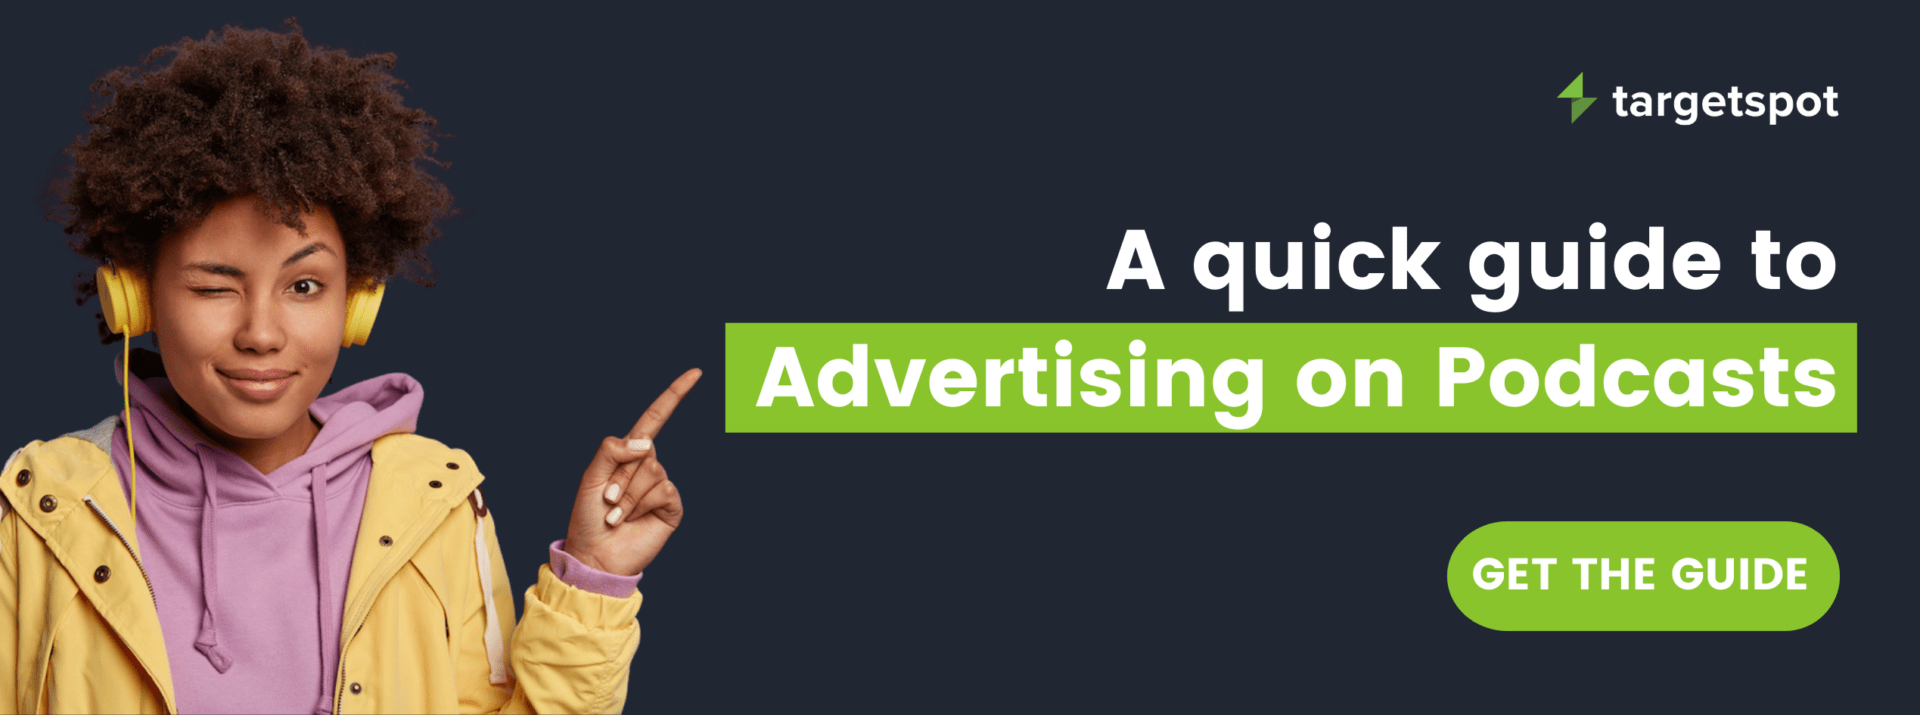 Advertise on Podcast guide